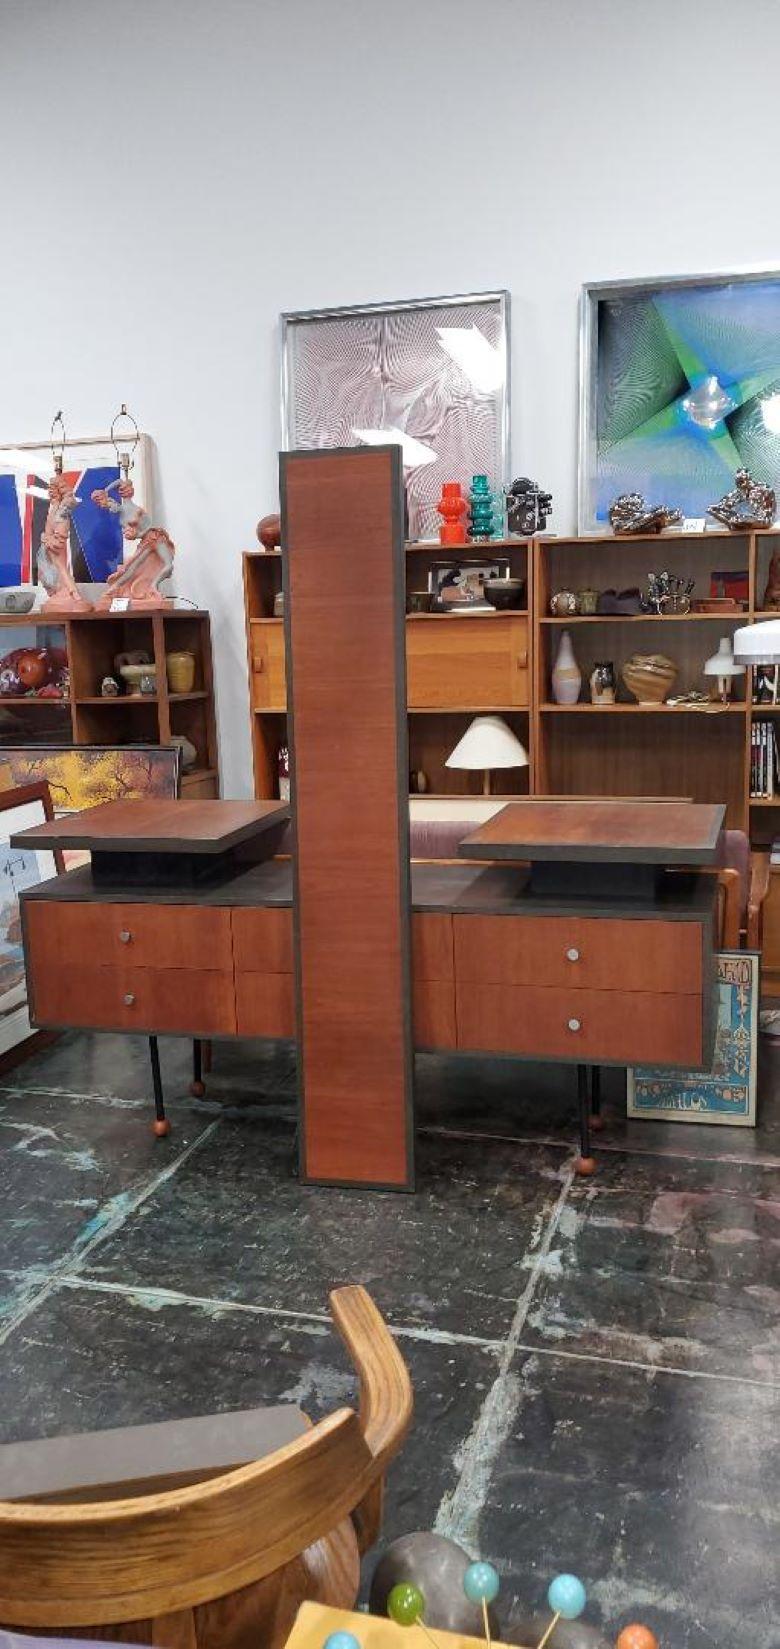 1970s - 4 piece bedroom suite - dresser, hanging headboard and 2 low night stands.

4 Piece bedroom suite, a walnut and Formica 6 drawer dresser, with matching custom walnut and Formica hanging headboard and 2 matching walnut and Formica low